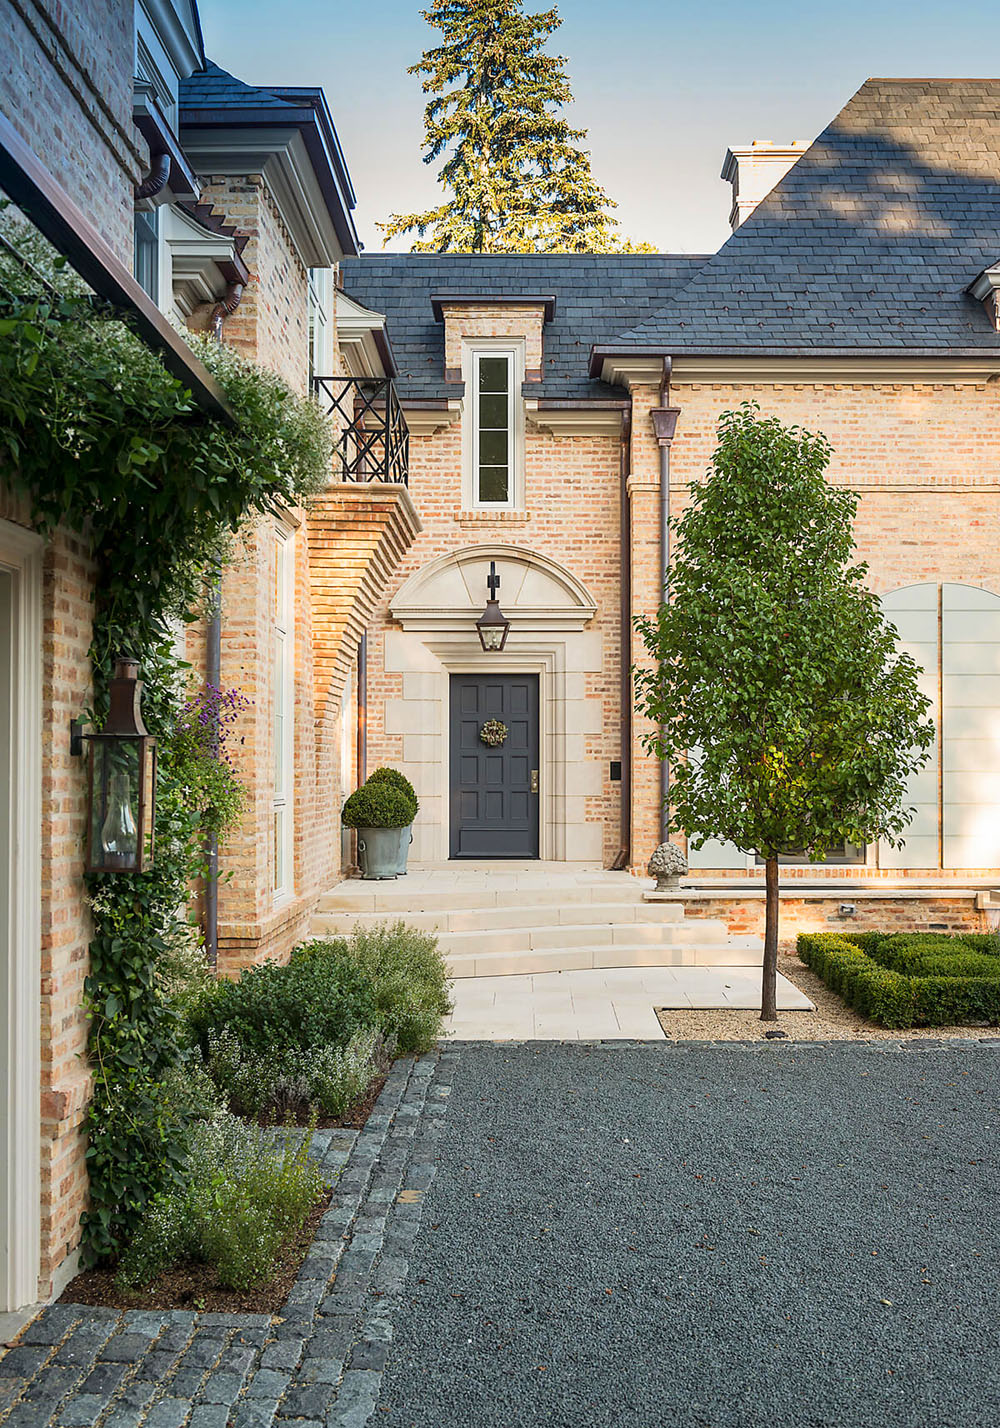 Elegant Brick Luxury Home with Classic Traditional Architecture